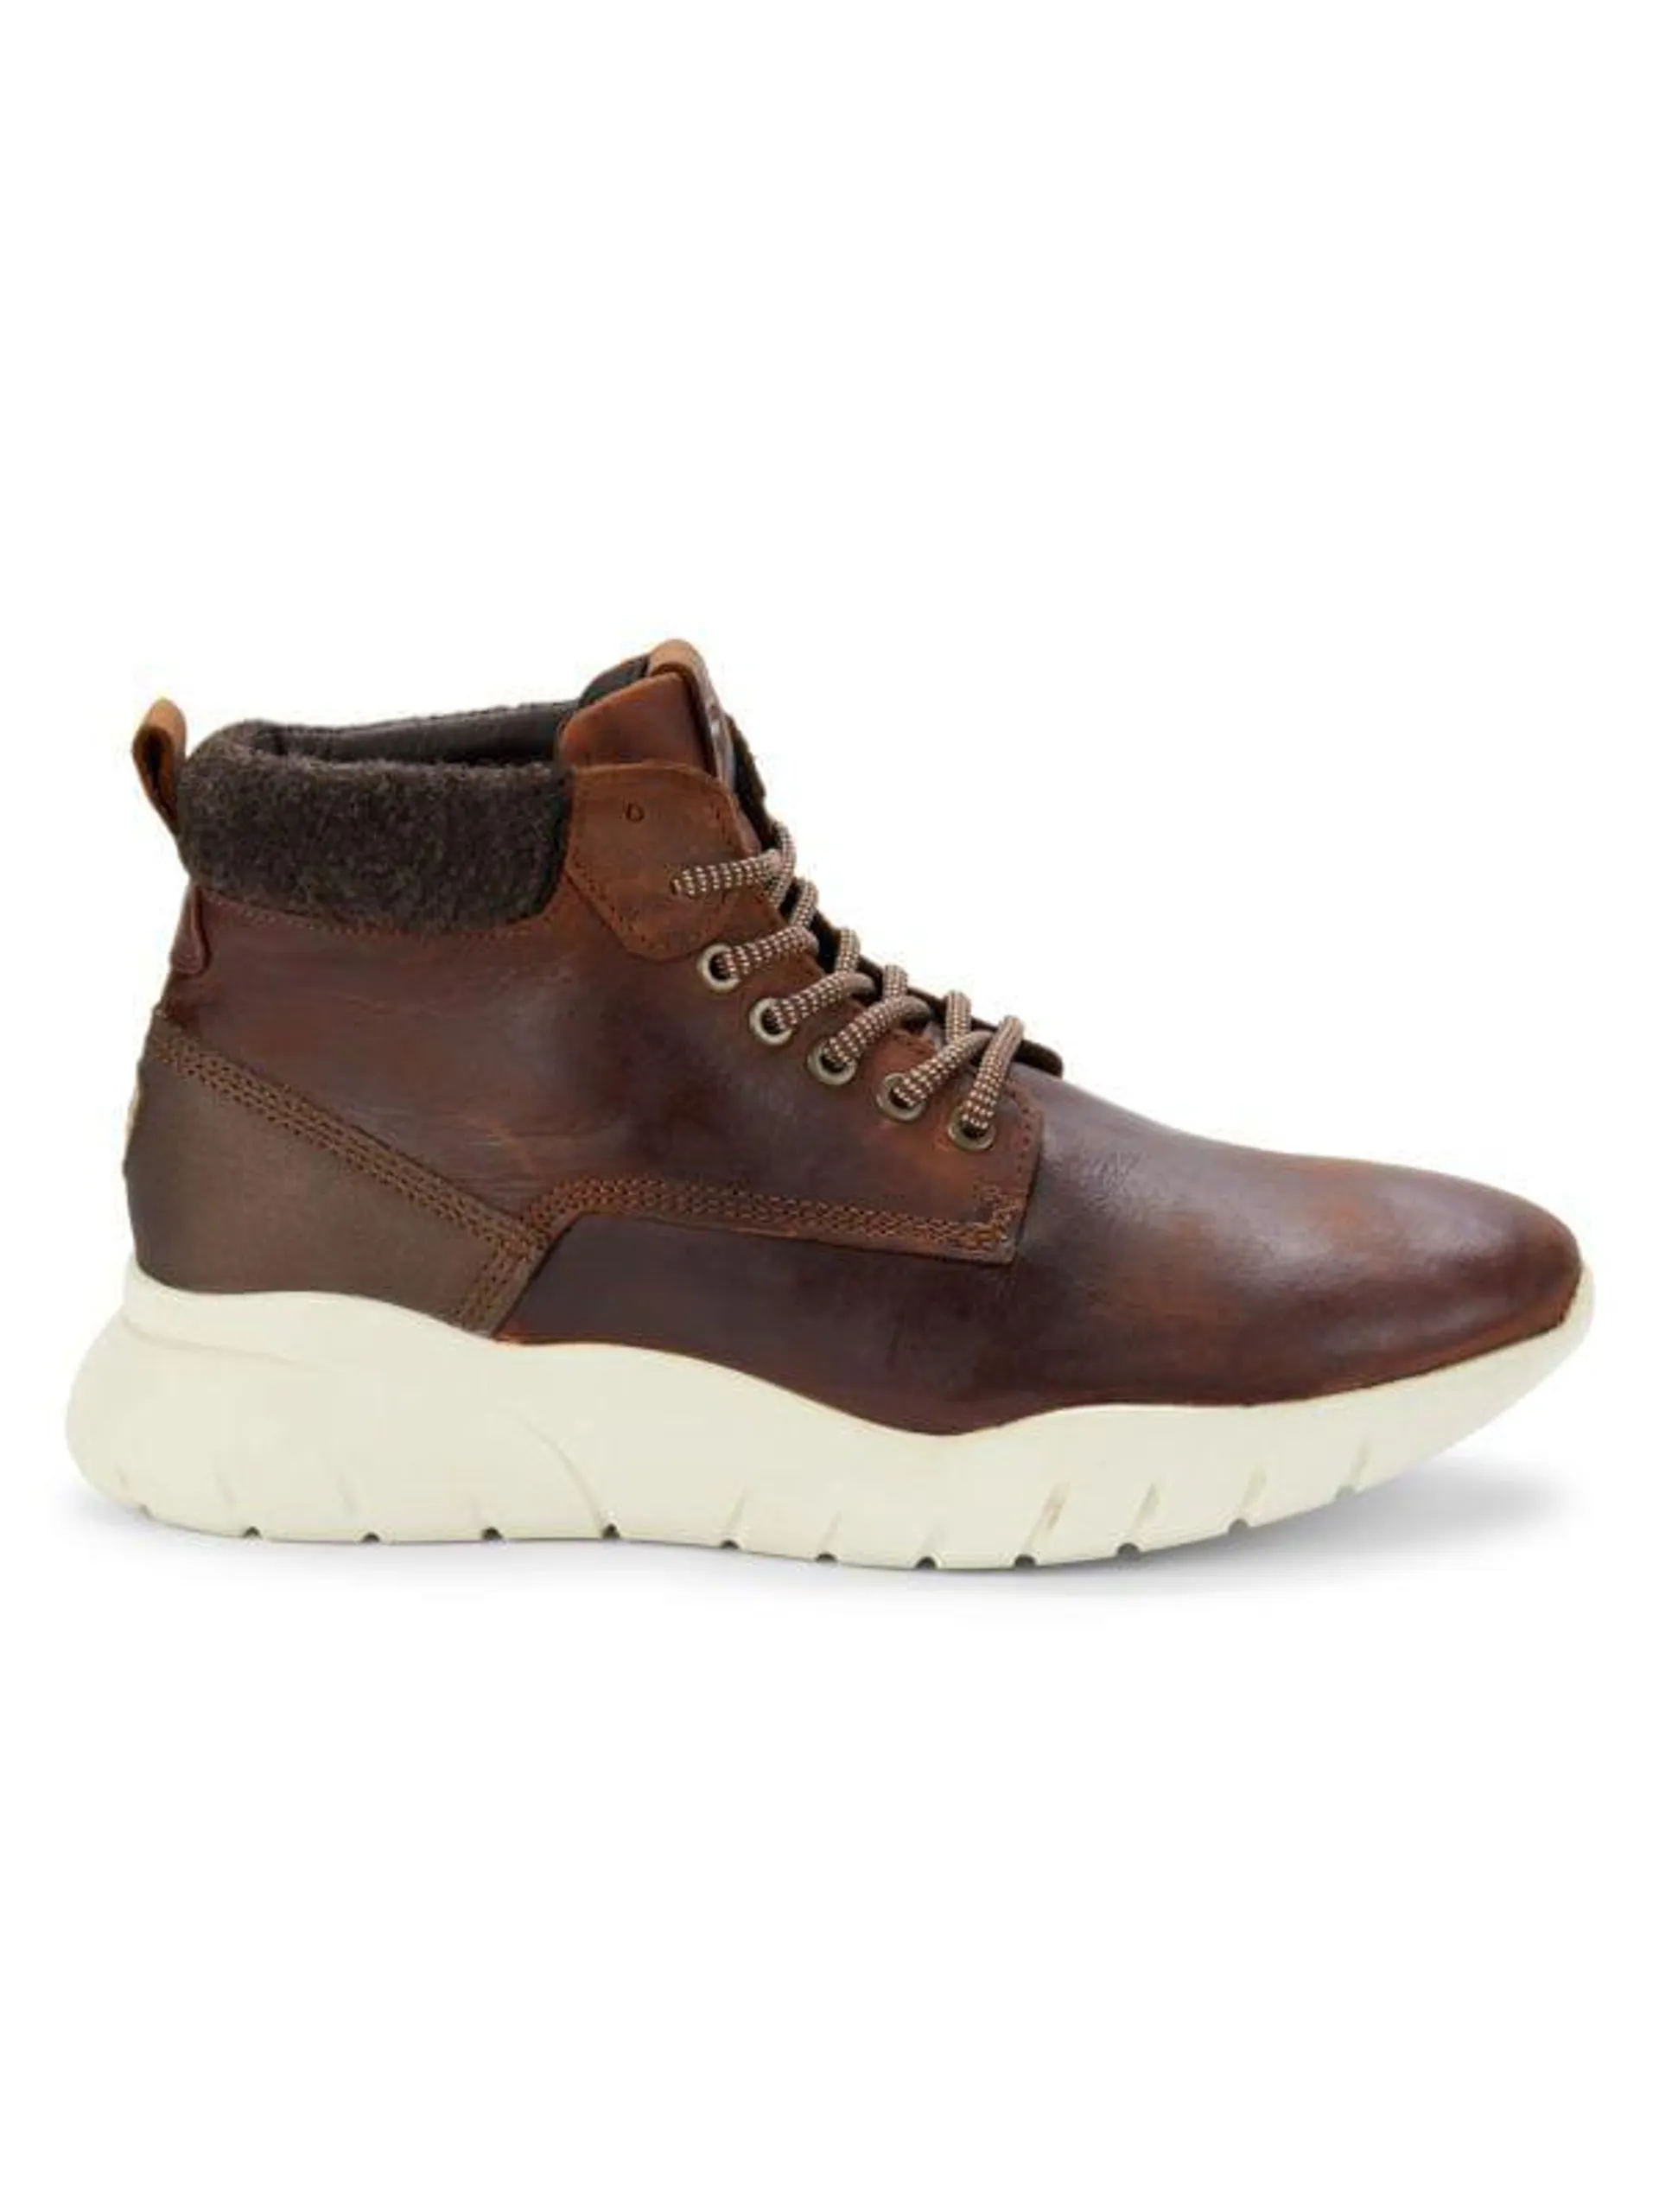 Calleon Leather Sneaker Boots